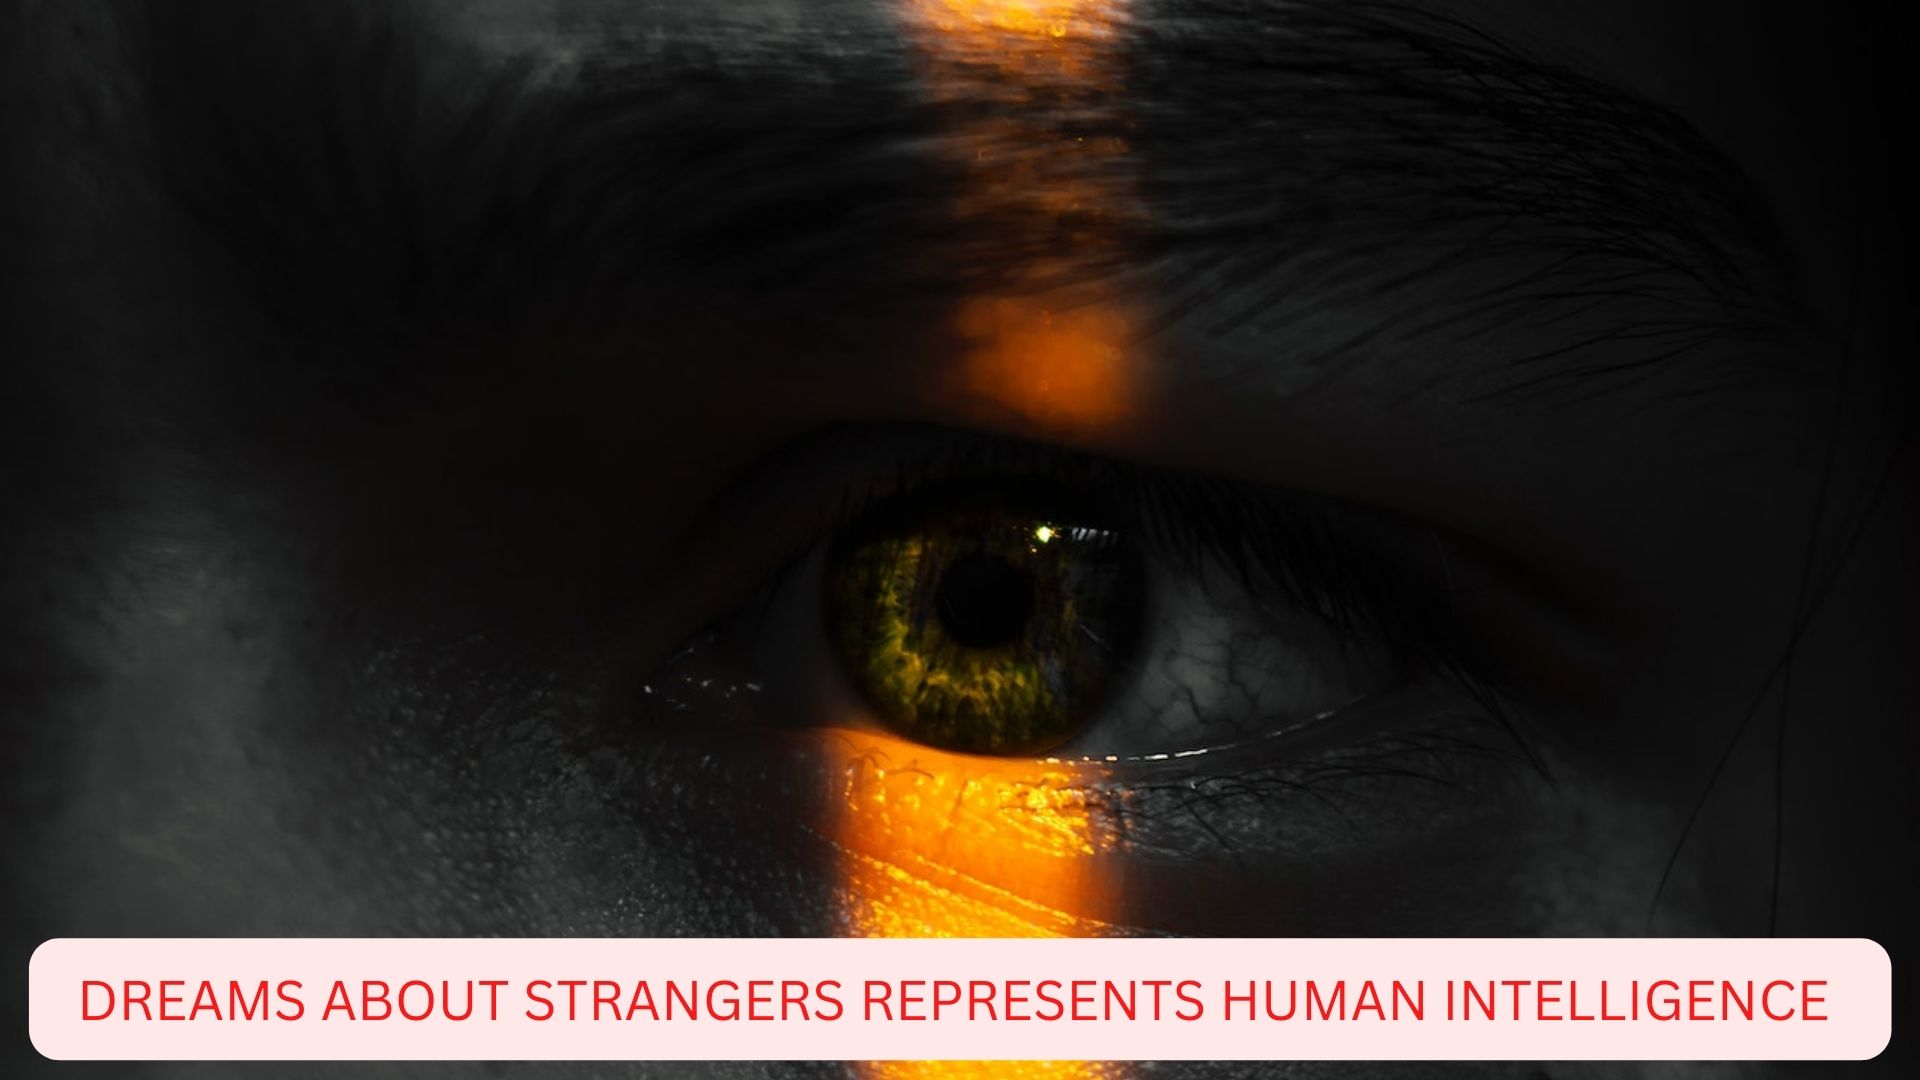 Dreams About Strangers - Represents Human Intelligence